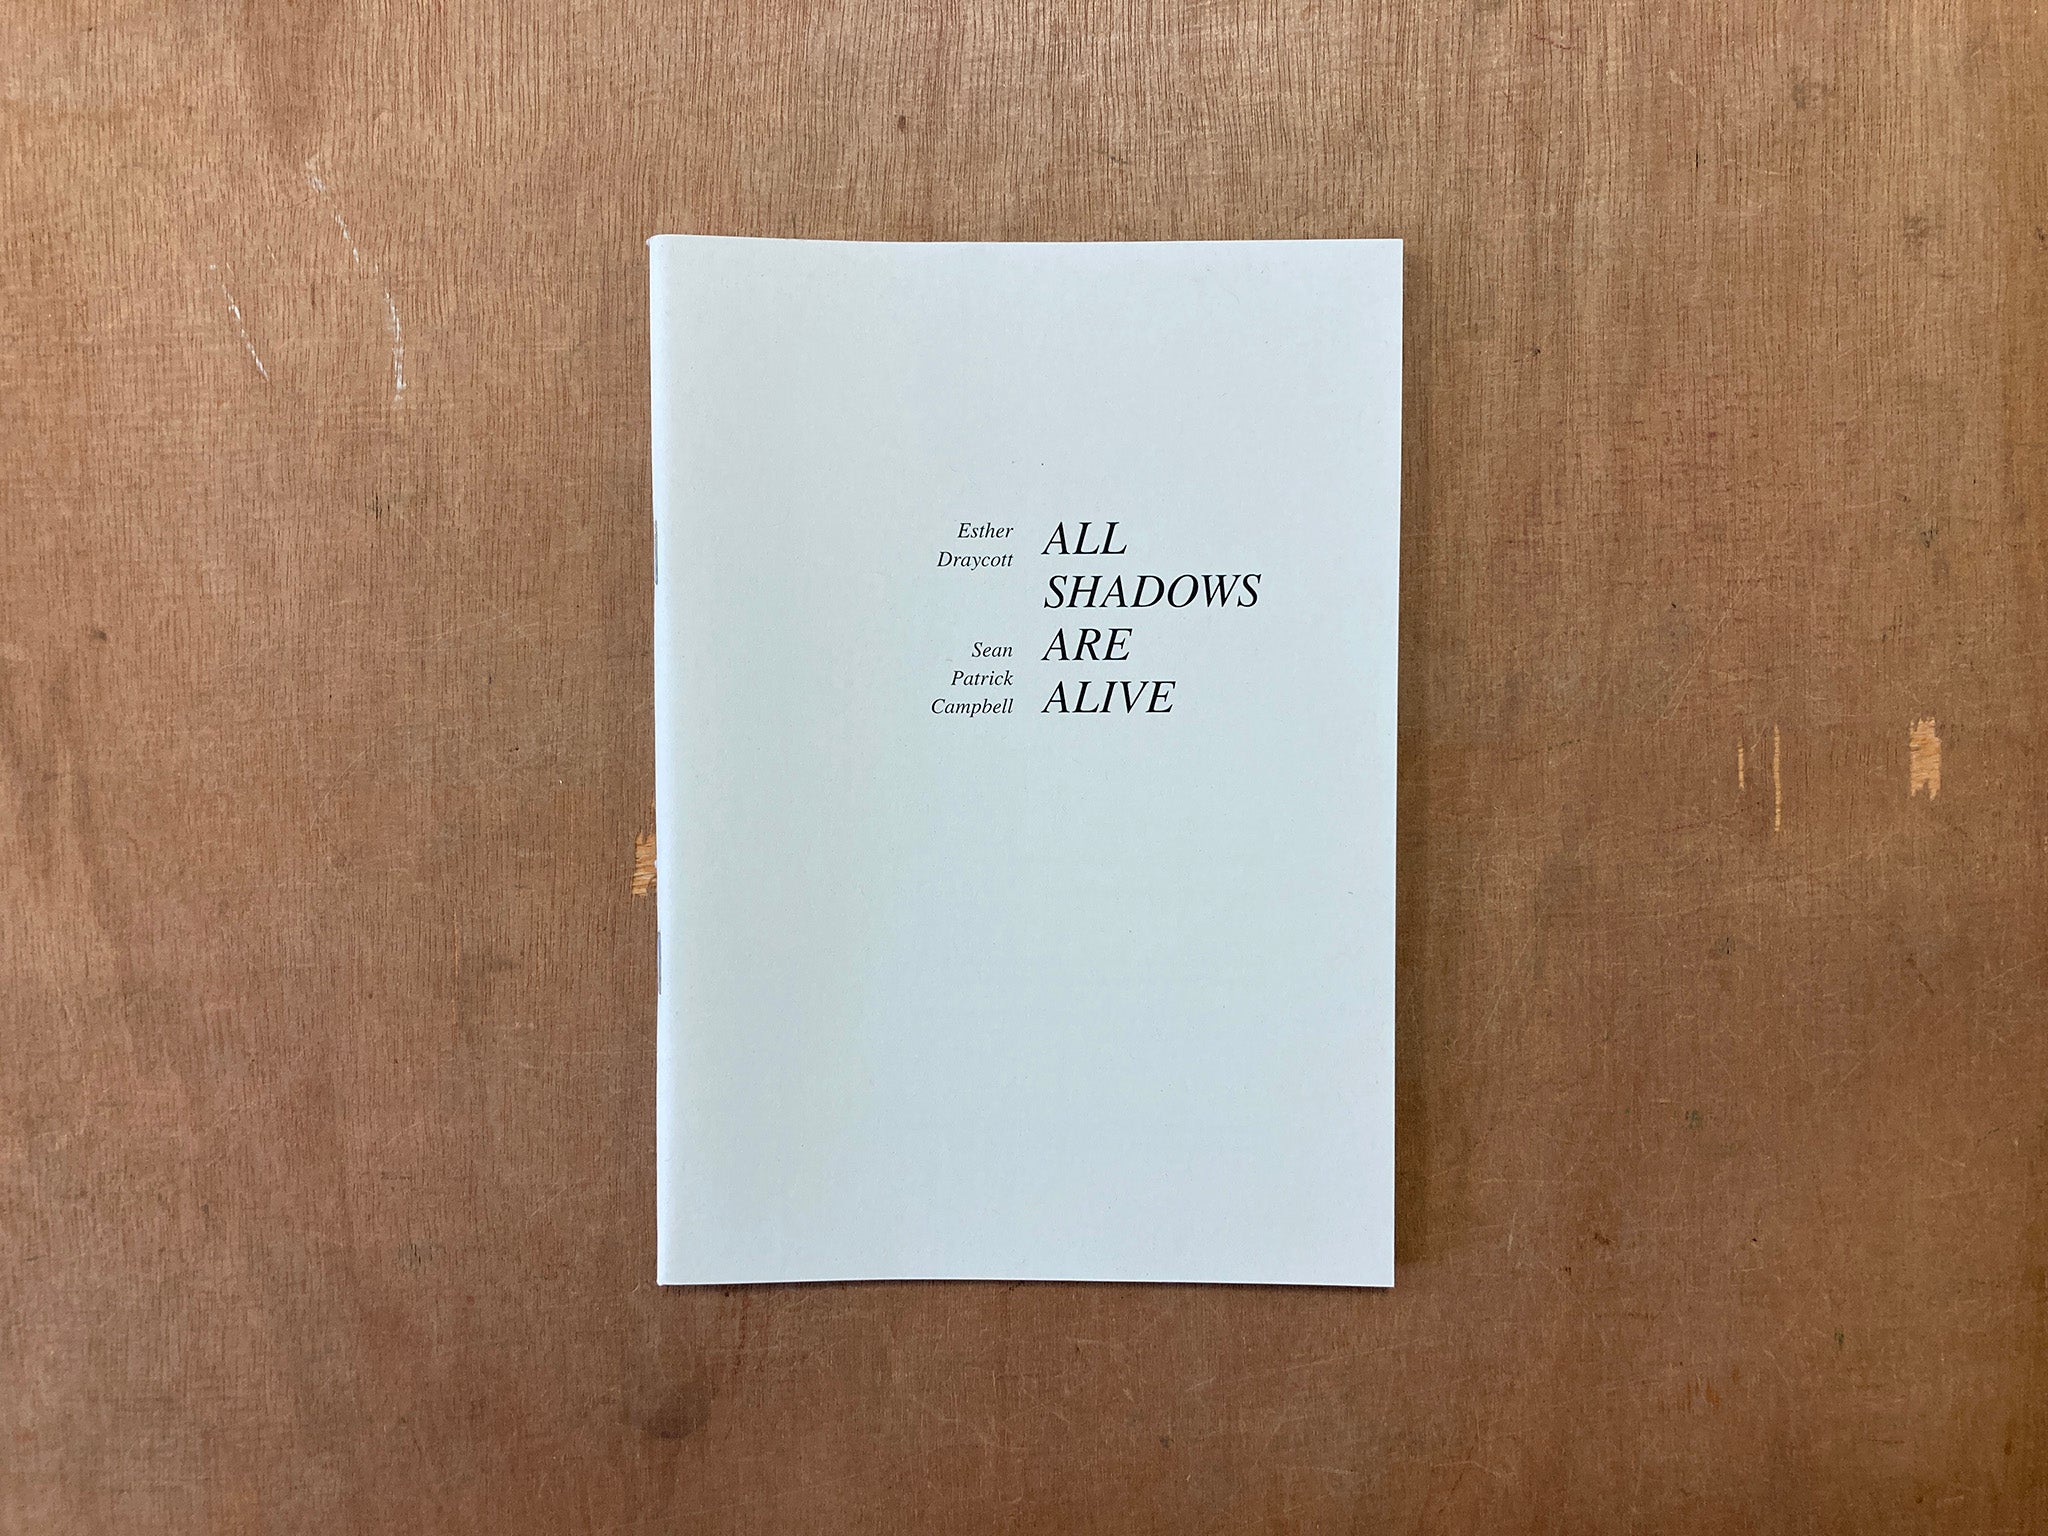 ALL SHADOWS ARE ALIVE by Esther Draycott and Sean Patrick Campbell